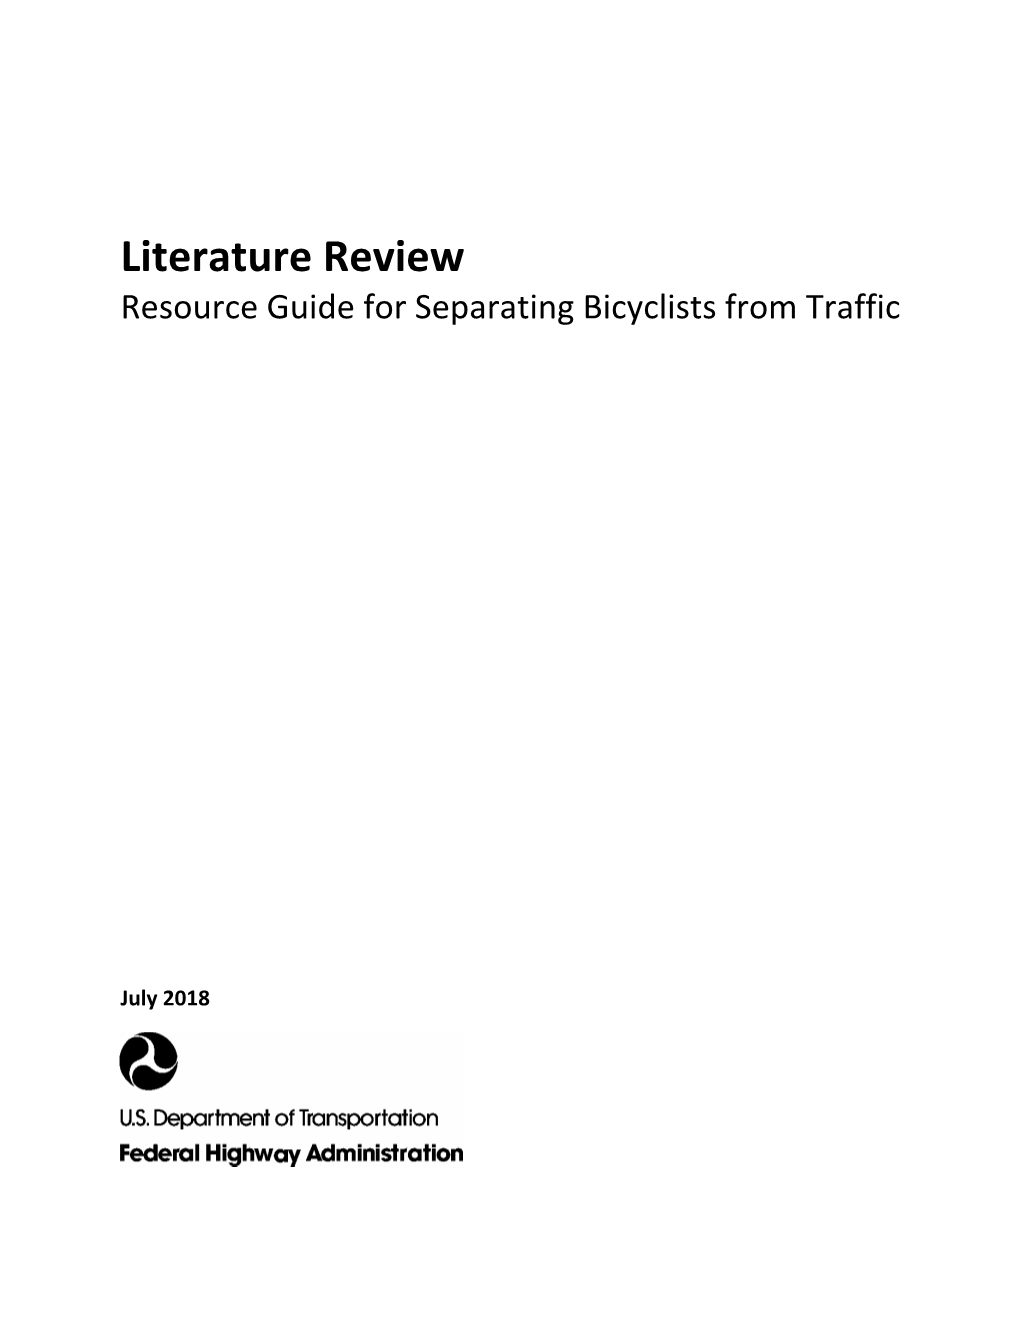 Literature Review Resource Guide for Separating Bicyclists from Traffic